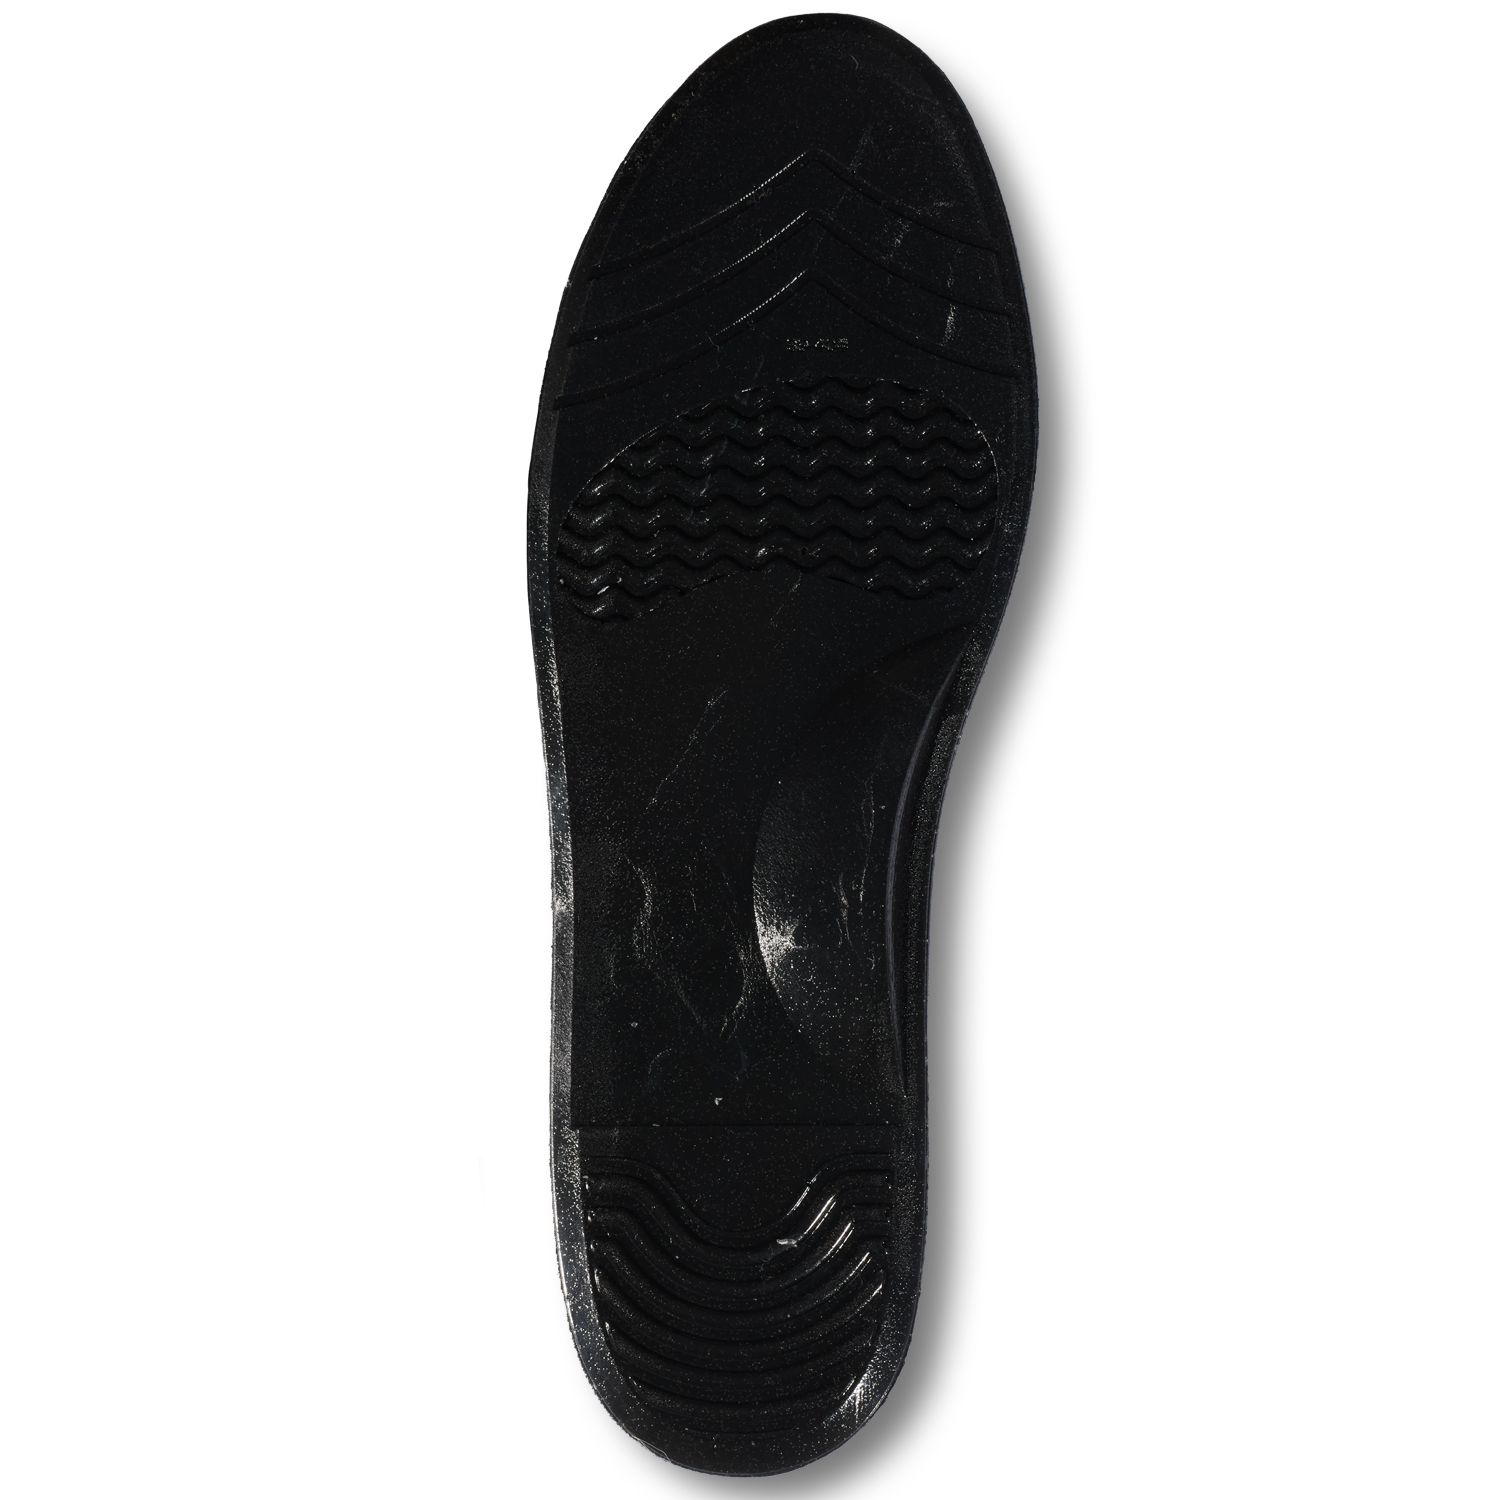 solelution gel insoles max single insole bottom view